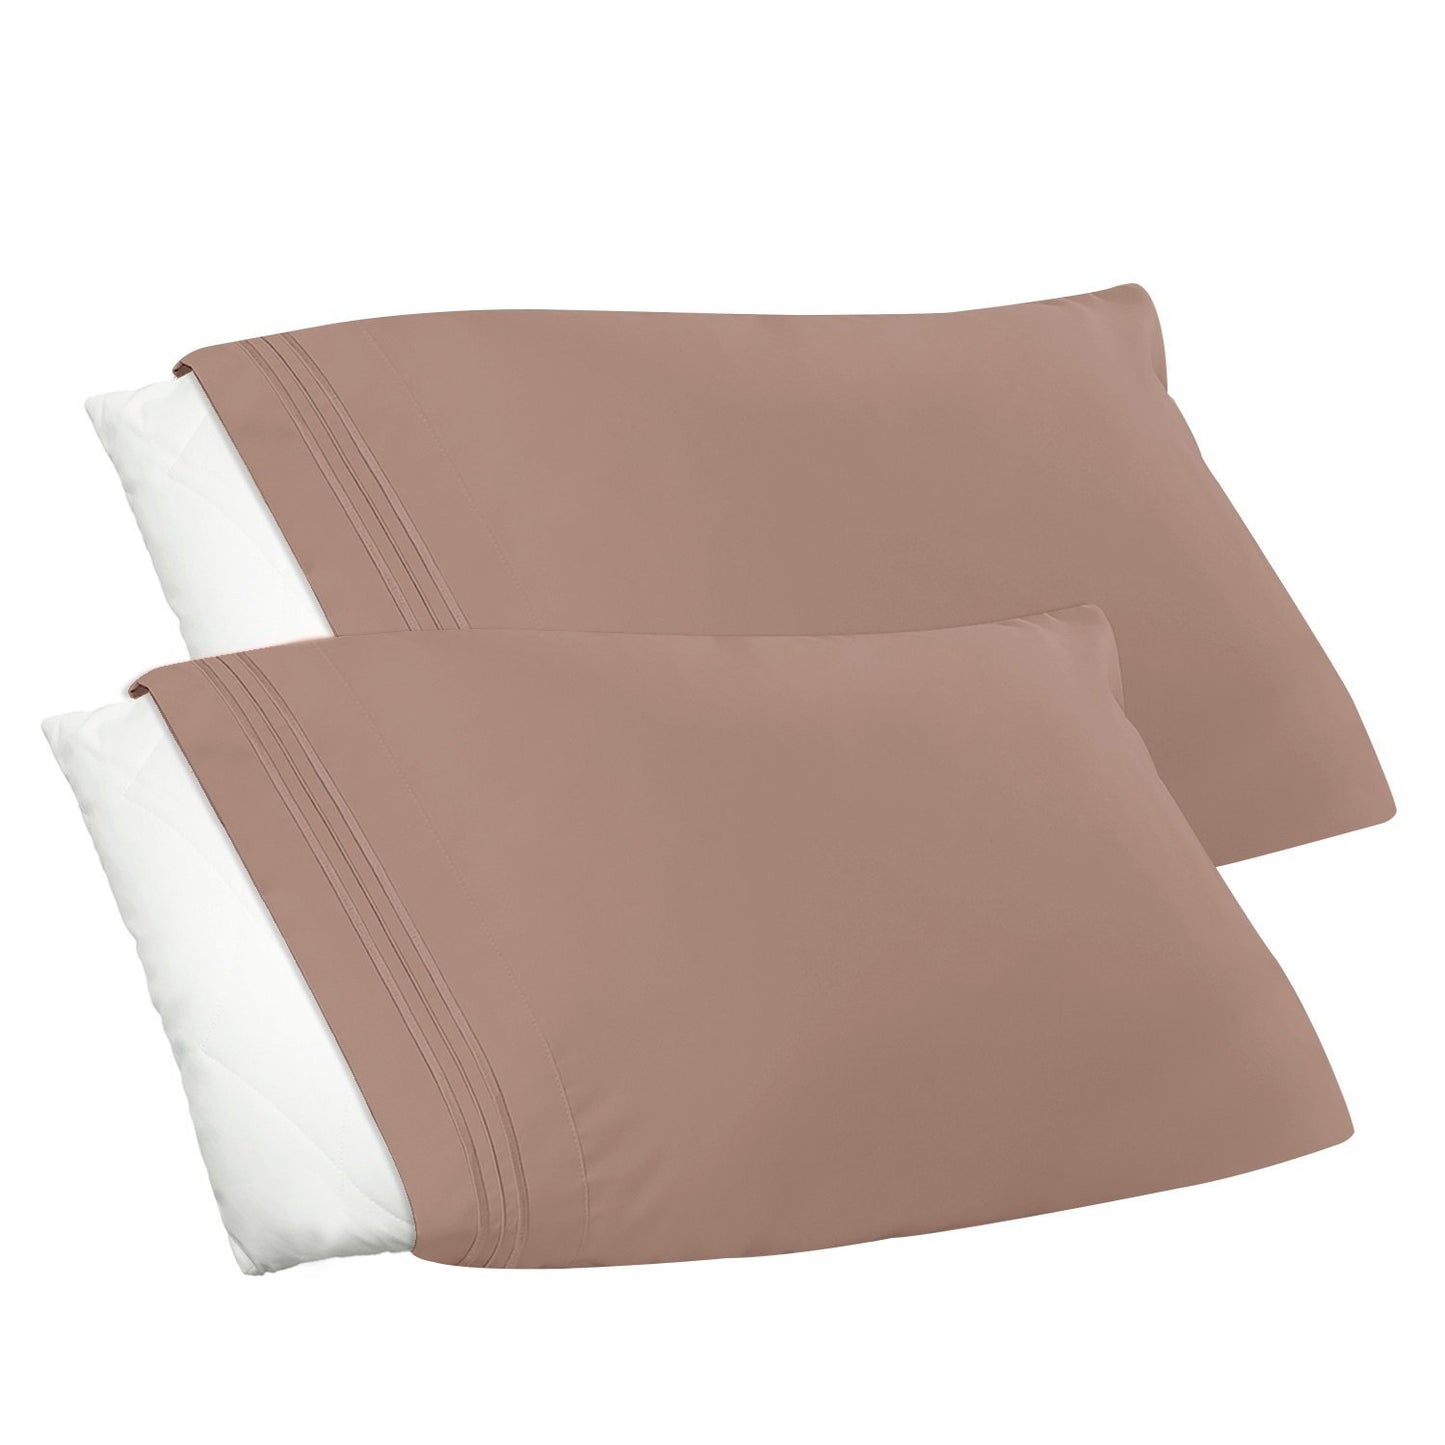 Nestl Bedding Soft Pillow Case Set of 2 - Double Brushed Microfiber Hypoallergenic Pillow Covers - 1800 Series Premium Bed Pillow Cases